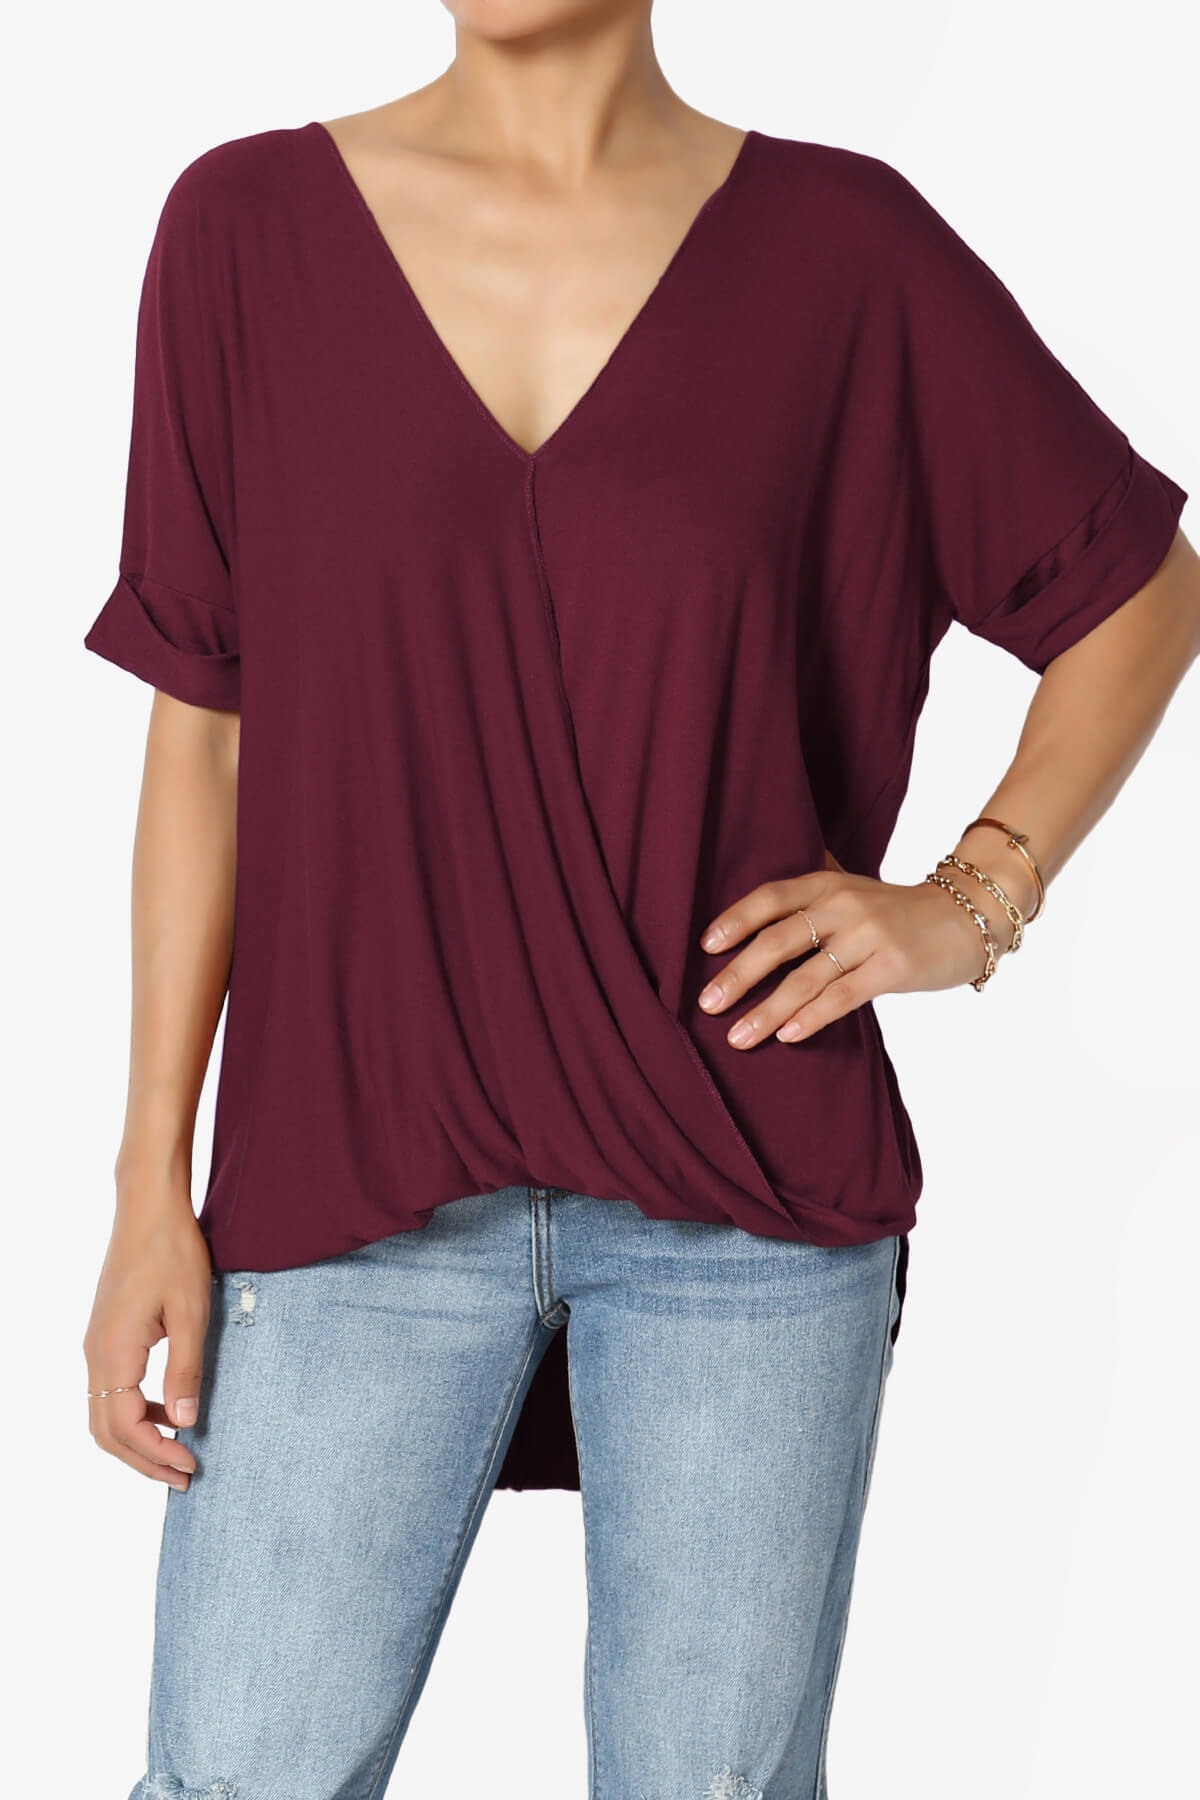 Load image into Gallery viewer, Tackle Wrap Hi-Low Crepe Knit Top DARK BURGUNDY_1
